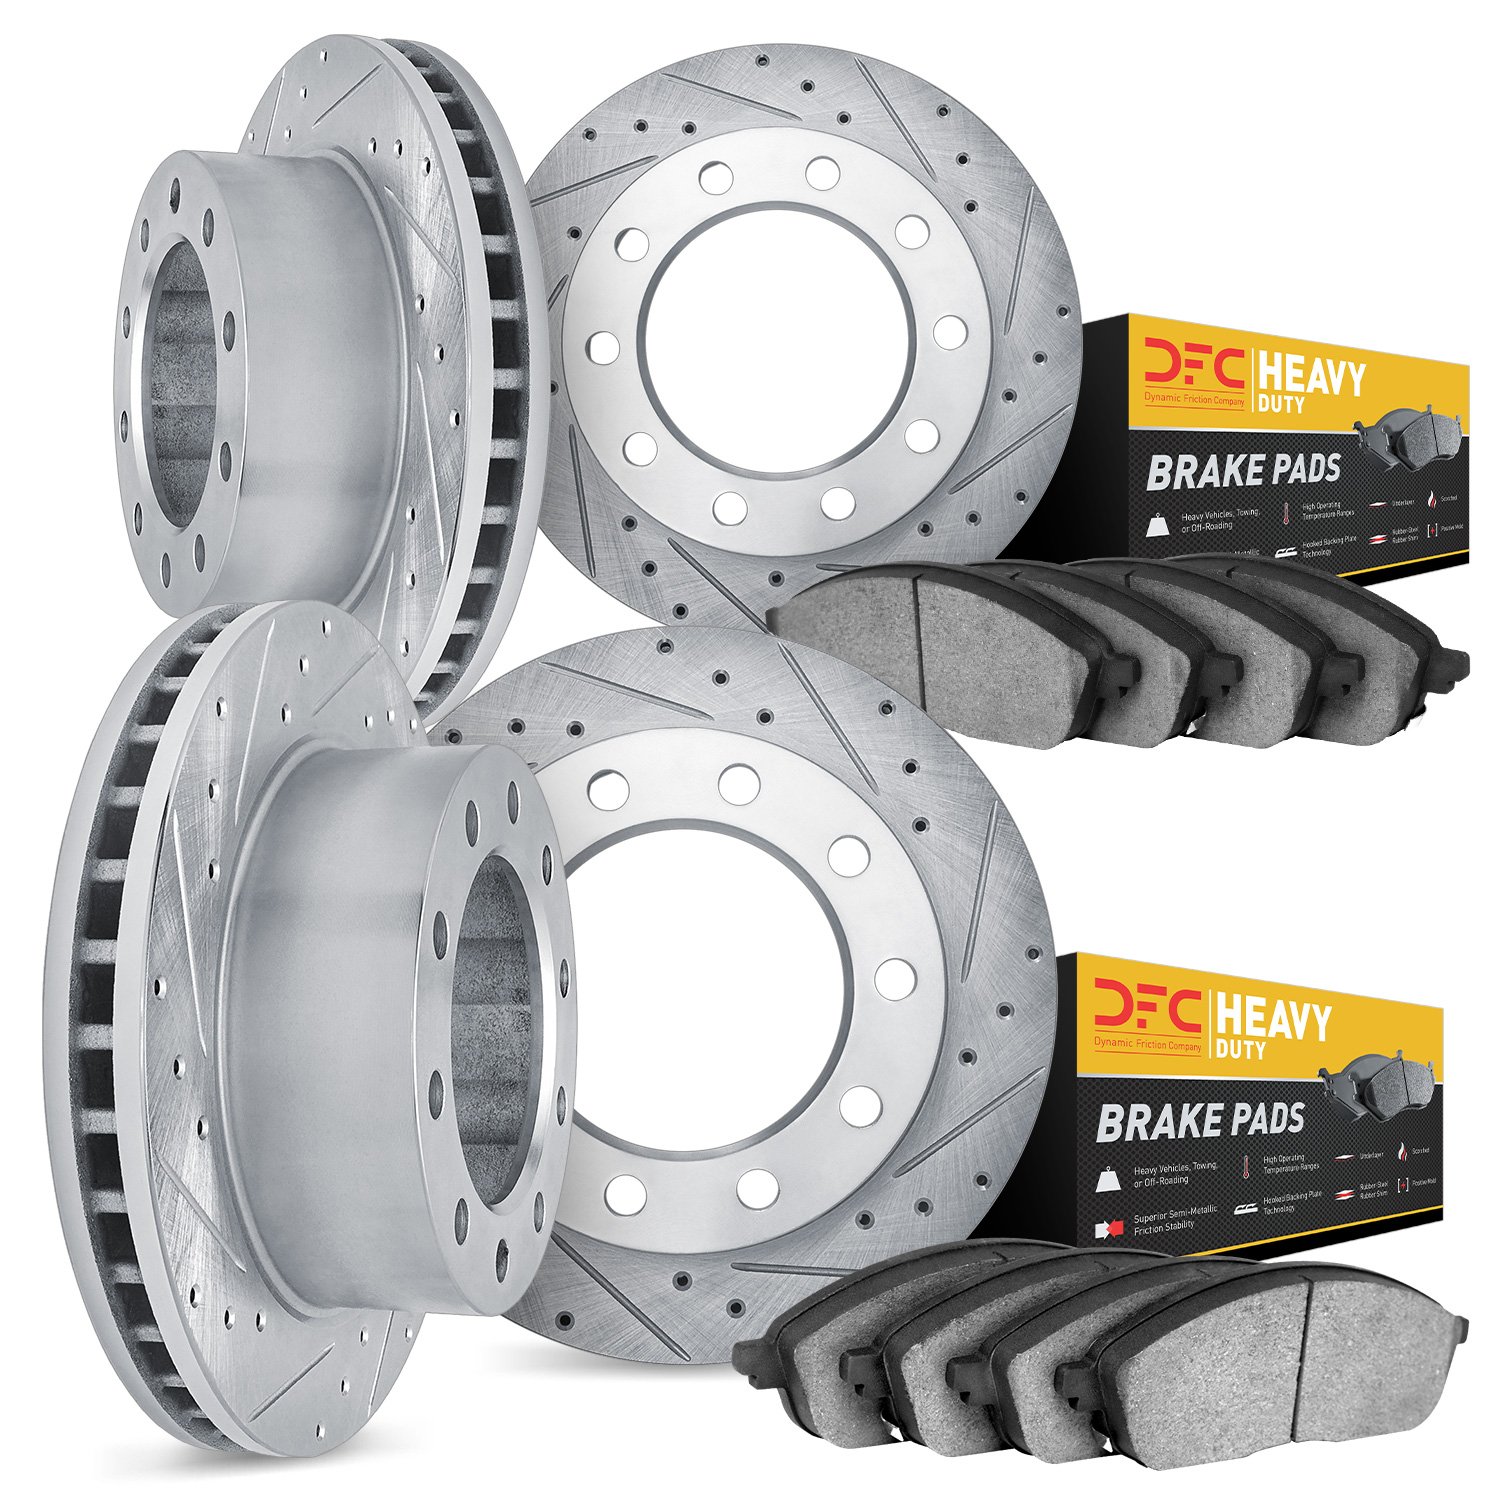 7204-99121 Drilled/Slotted Rotors w/Heavy-Duty Brake Pads Kit [Silver], Fits Select Ford/Lincoln/Mercury/Mazda, Position: Front